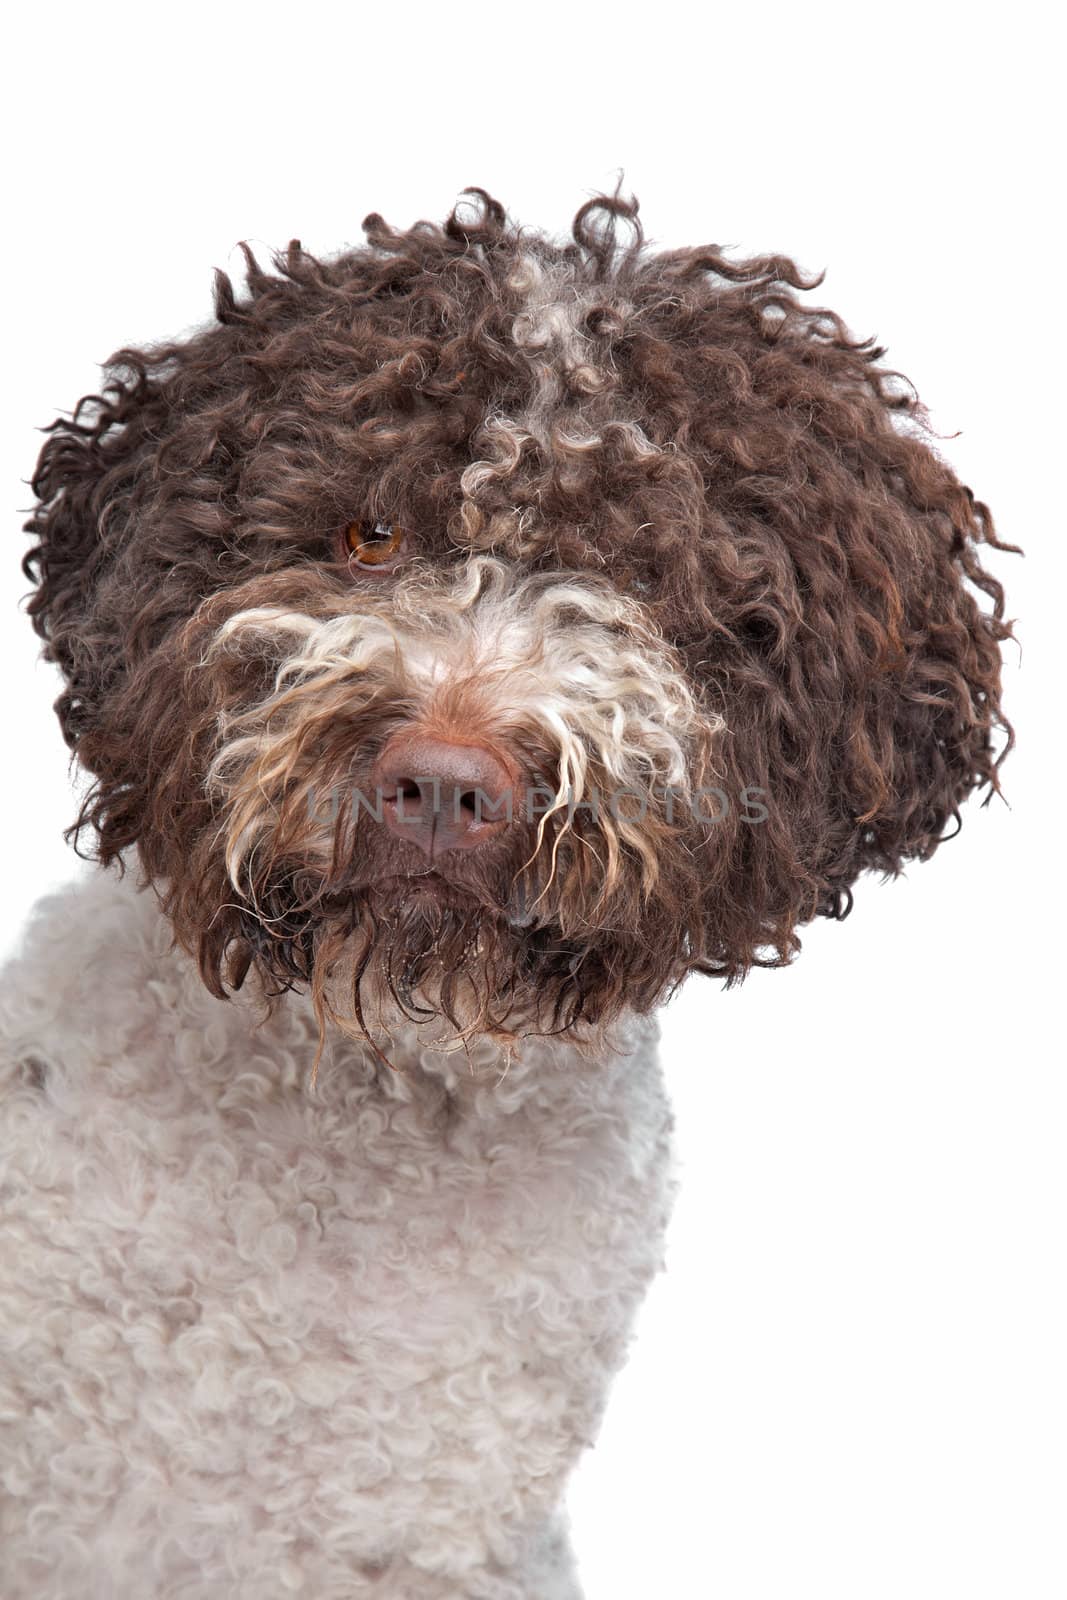 lagotto romagnola dog in front of a white background